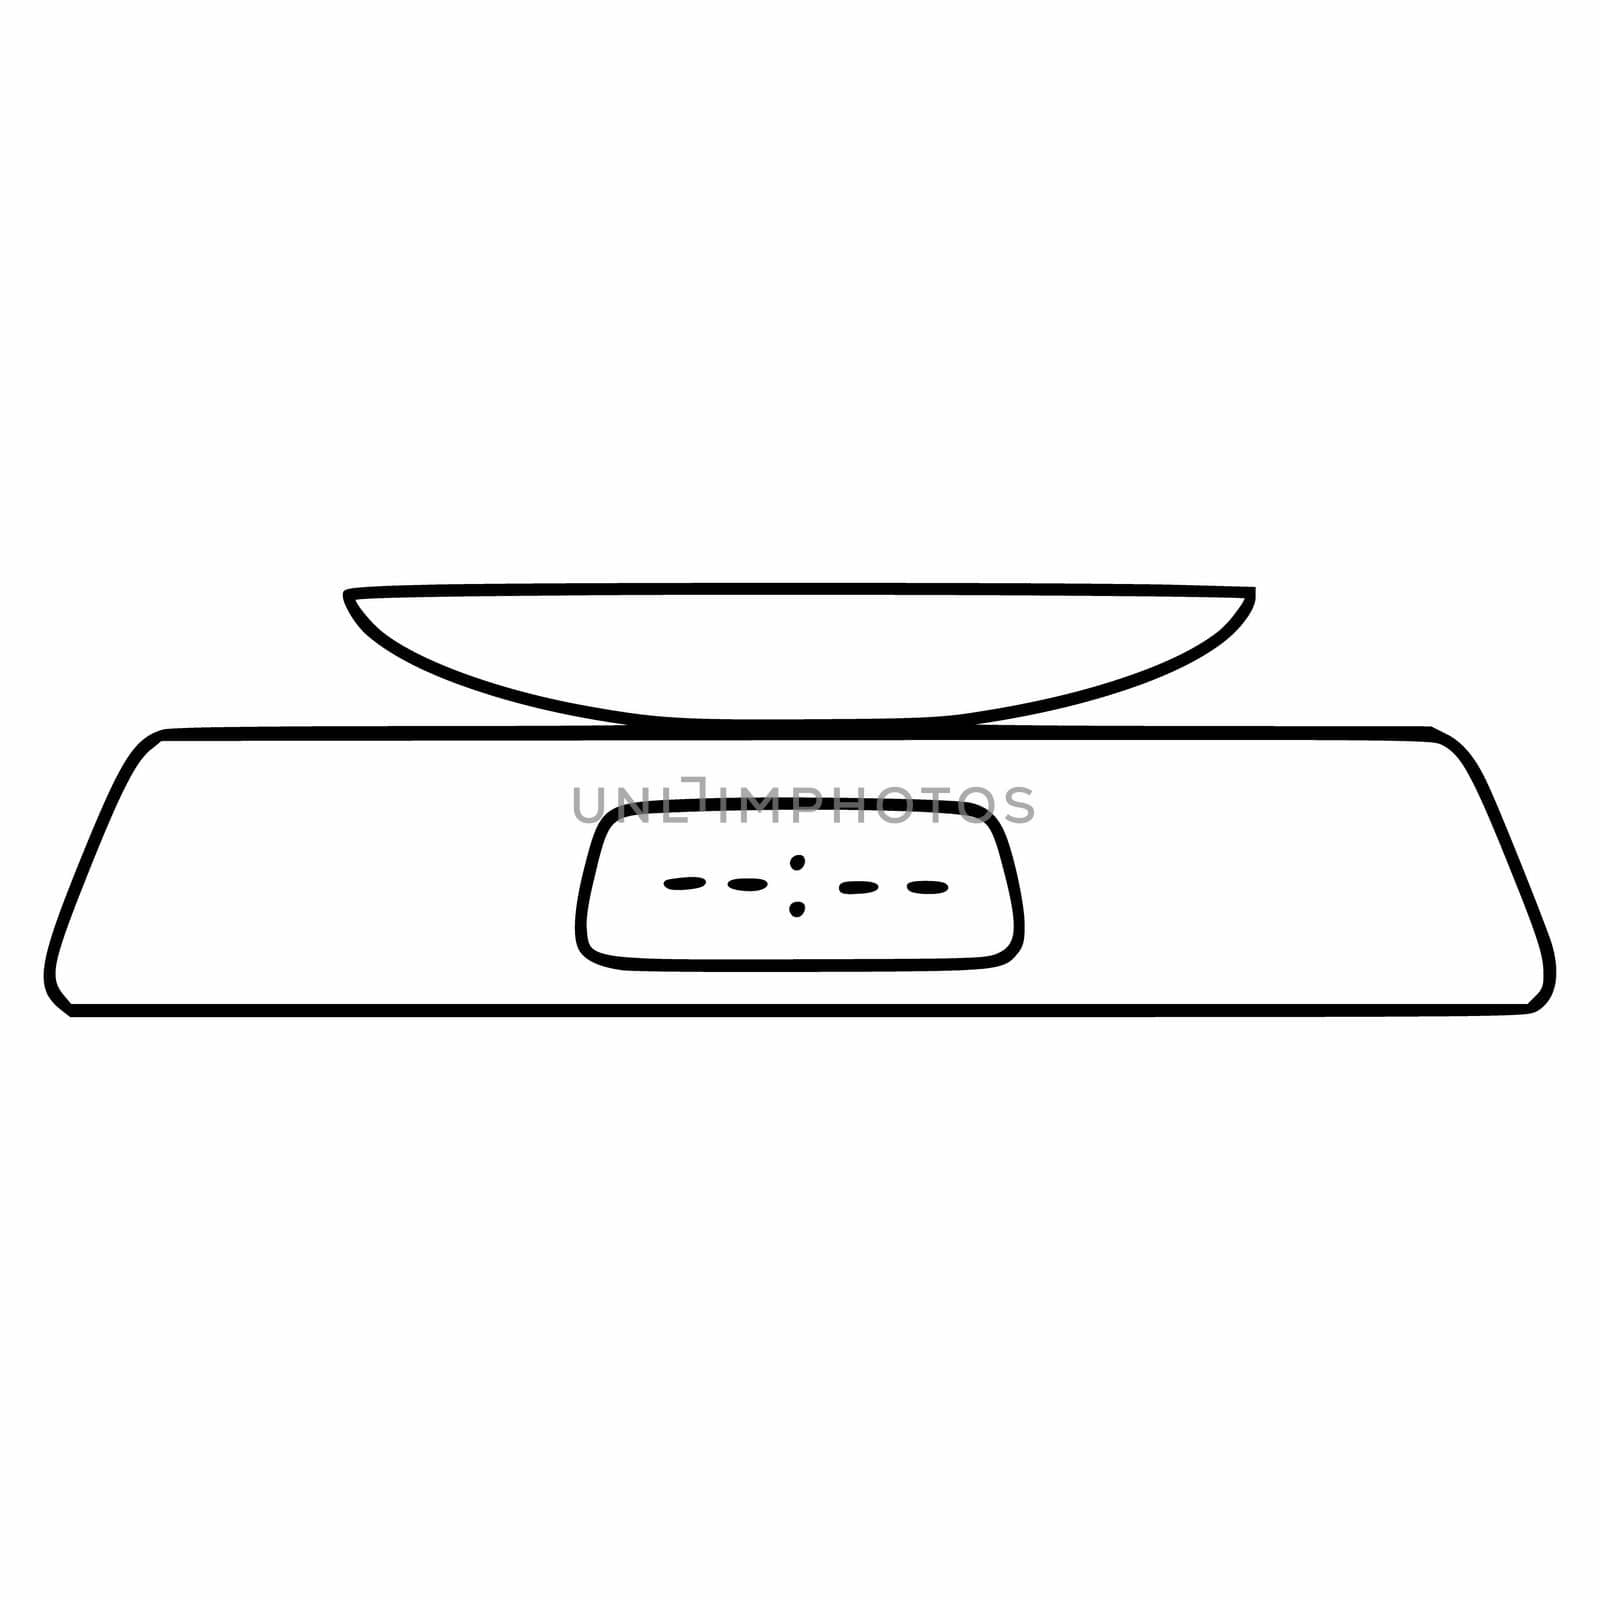 Kitchen electronic scales in the style of dood. Kitchen appliance for measuring the weight of food. Vector icon on a white background.